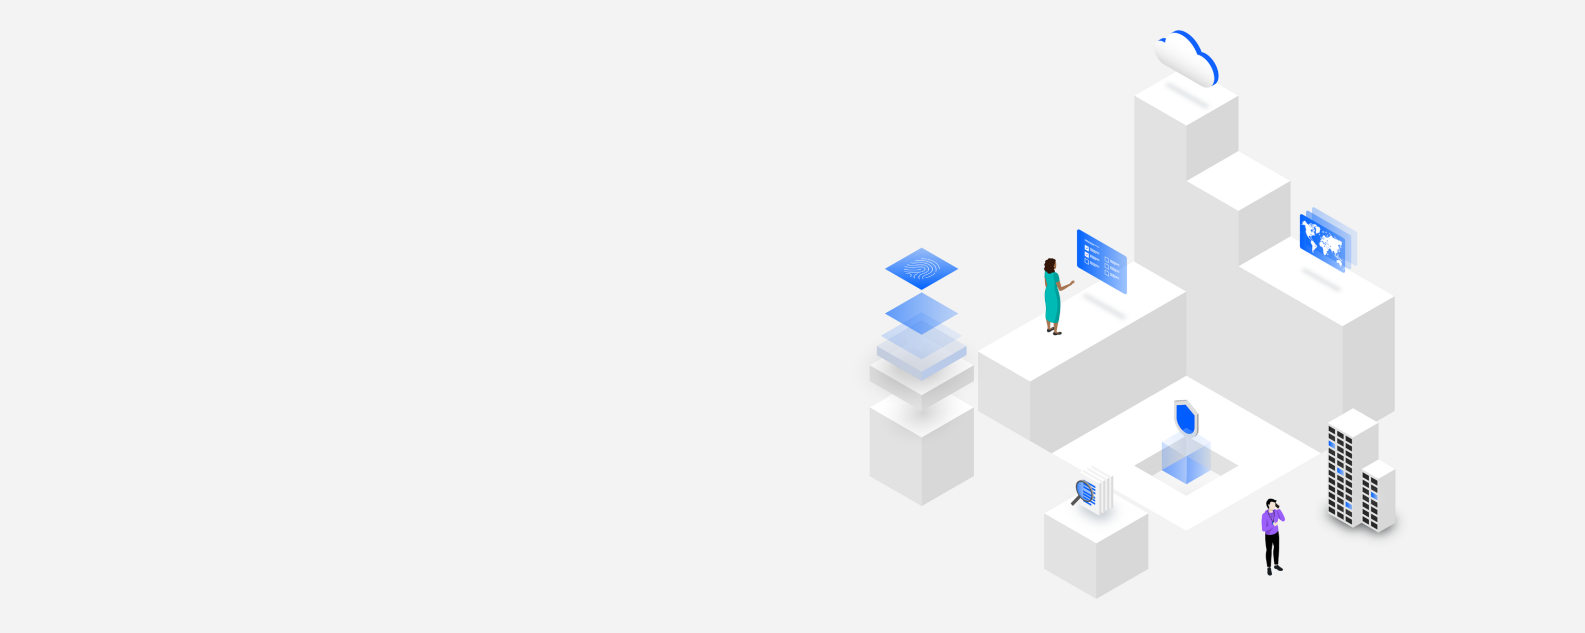 Isometric illustration of platforms and objects representing various IBM cloud compliance programs